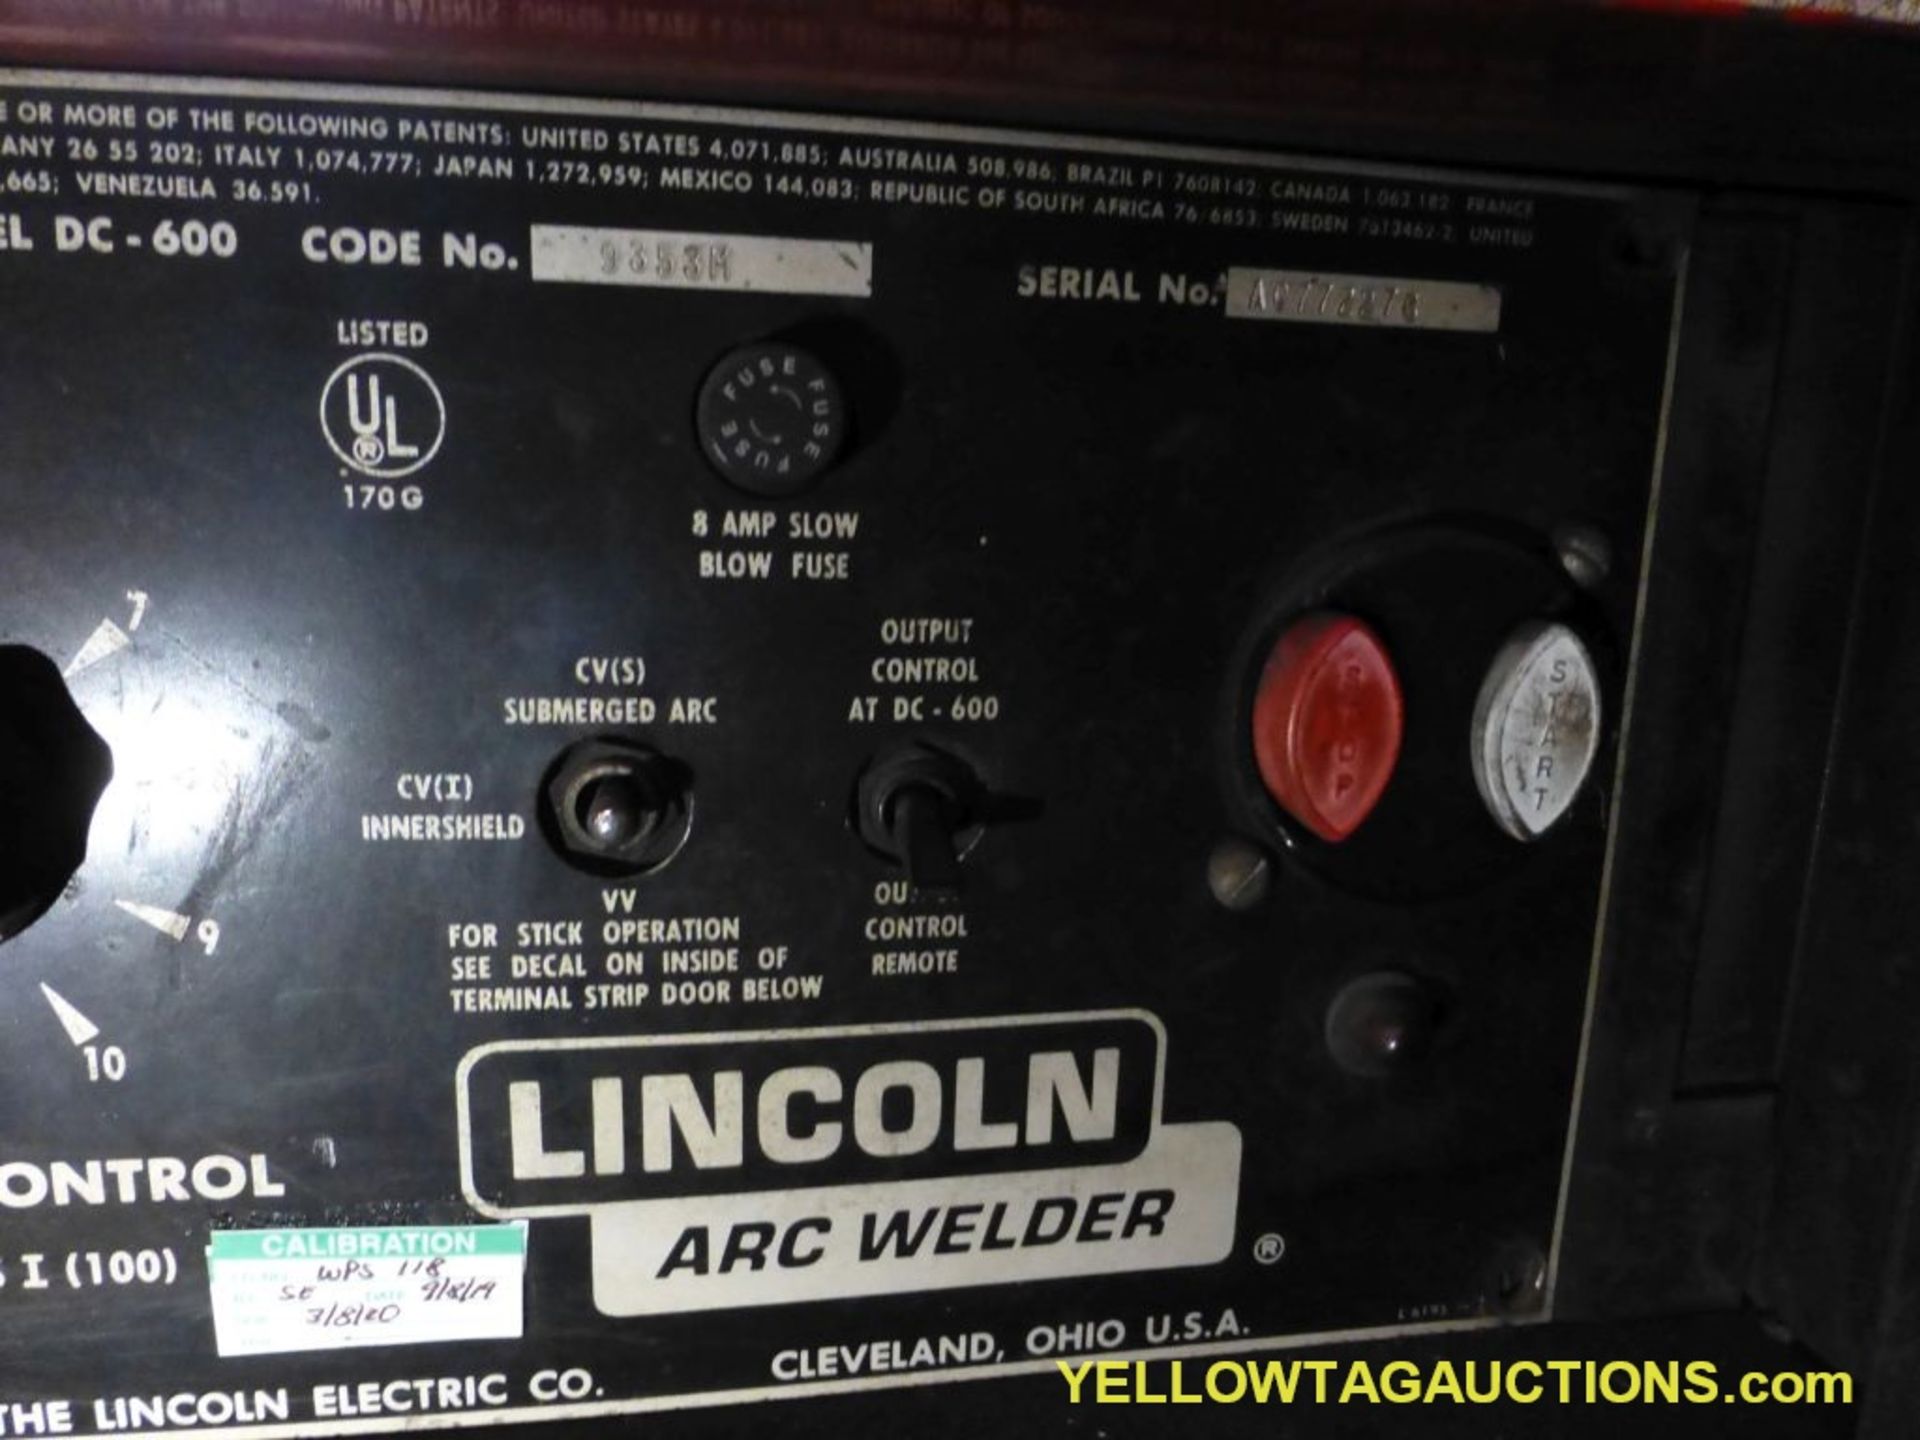 Lincoln Idea Arc DC-600 Welder | Includes: K-804 Multiprocess Switch w/Lincoln Squirt LN-9 Wire Feed - Image 5 of 9